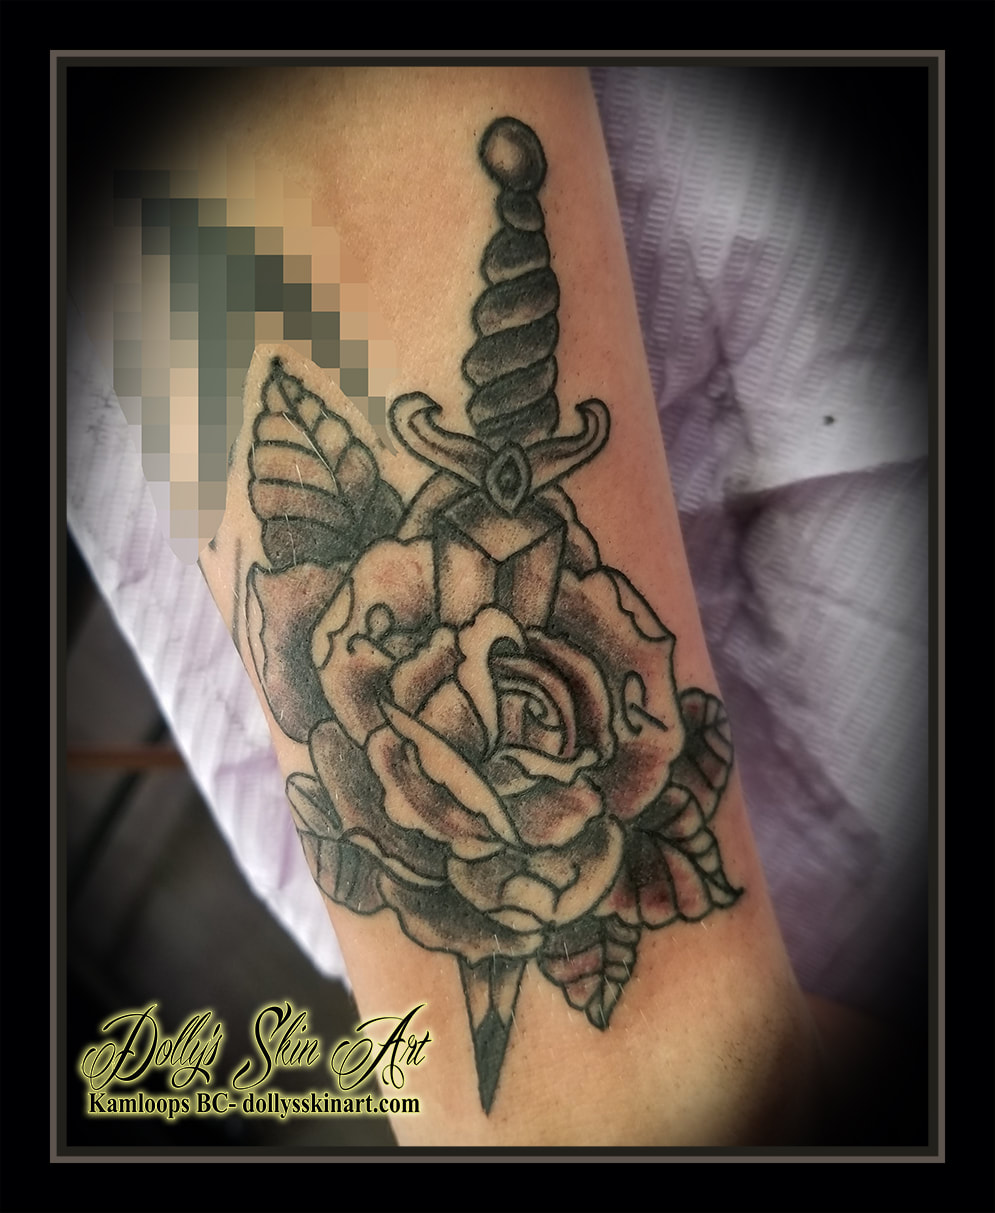 rose dagger tattoo black and grey tradtional style shading memorial arm tattoo kamloops dolly's skin art